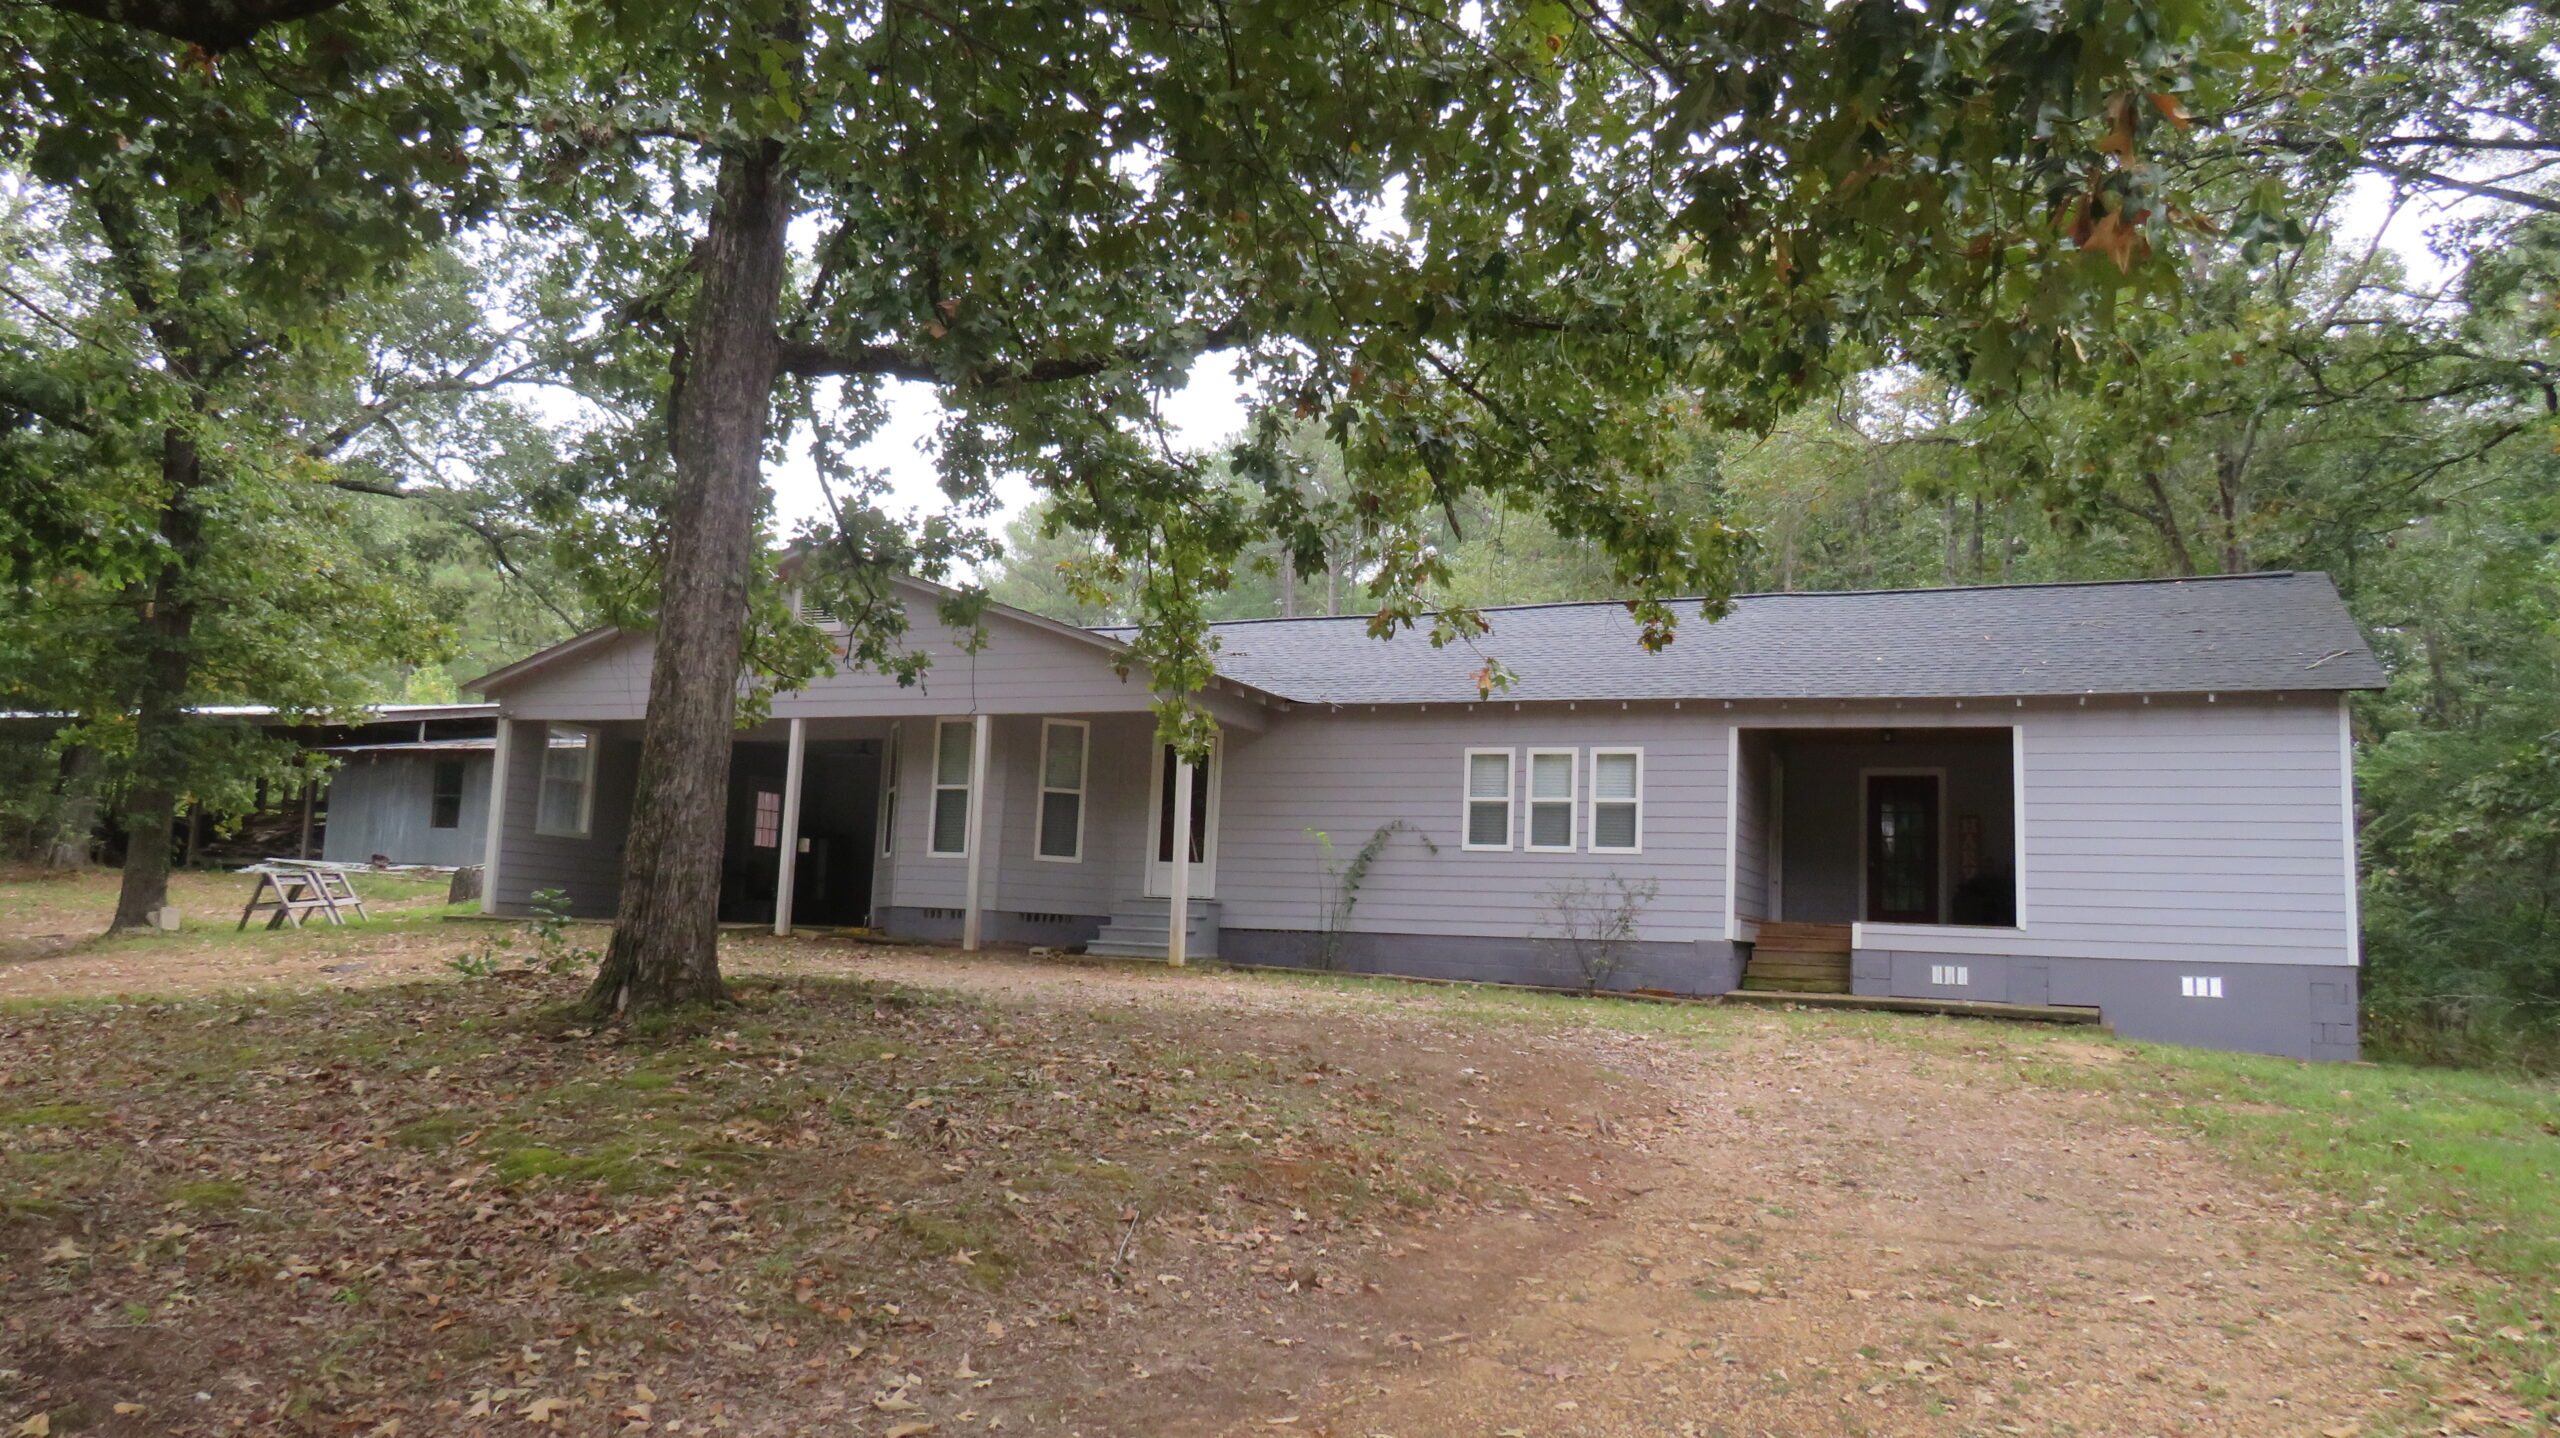 21686 State Highway 12  Ethel,  Ms. 39067